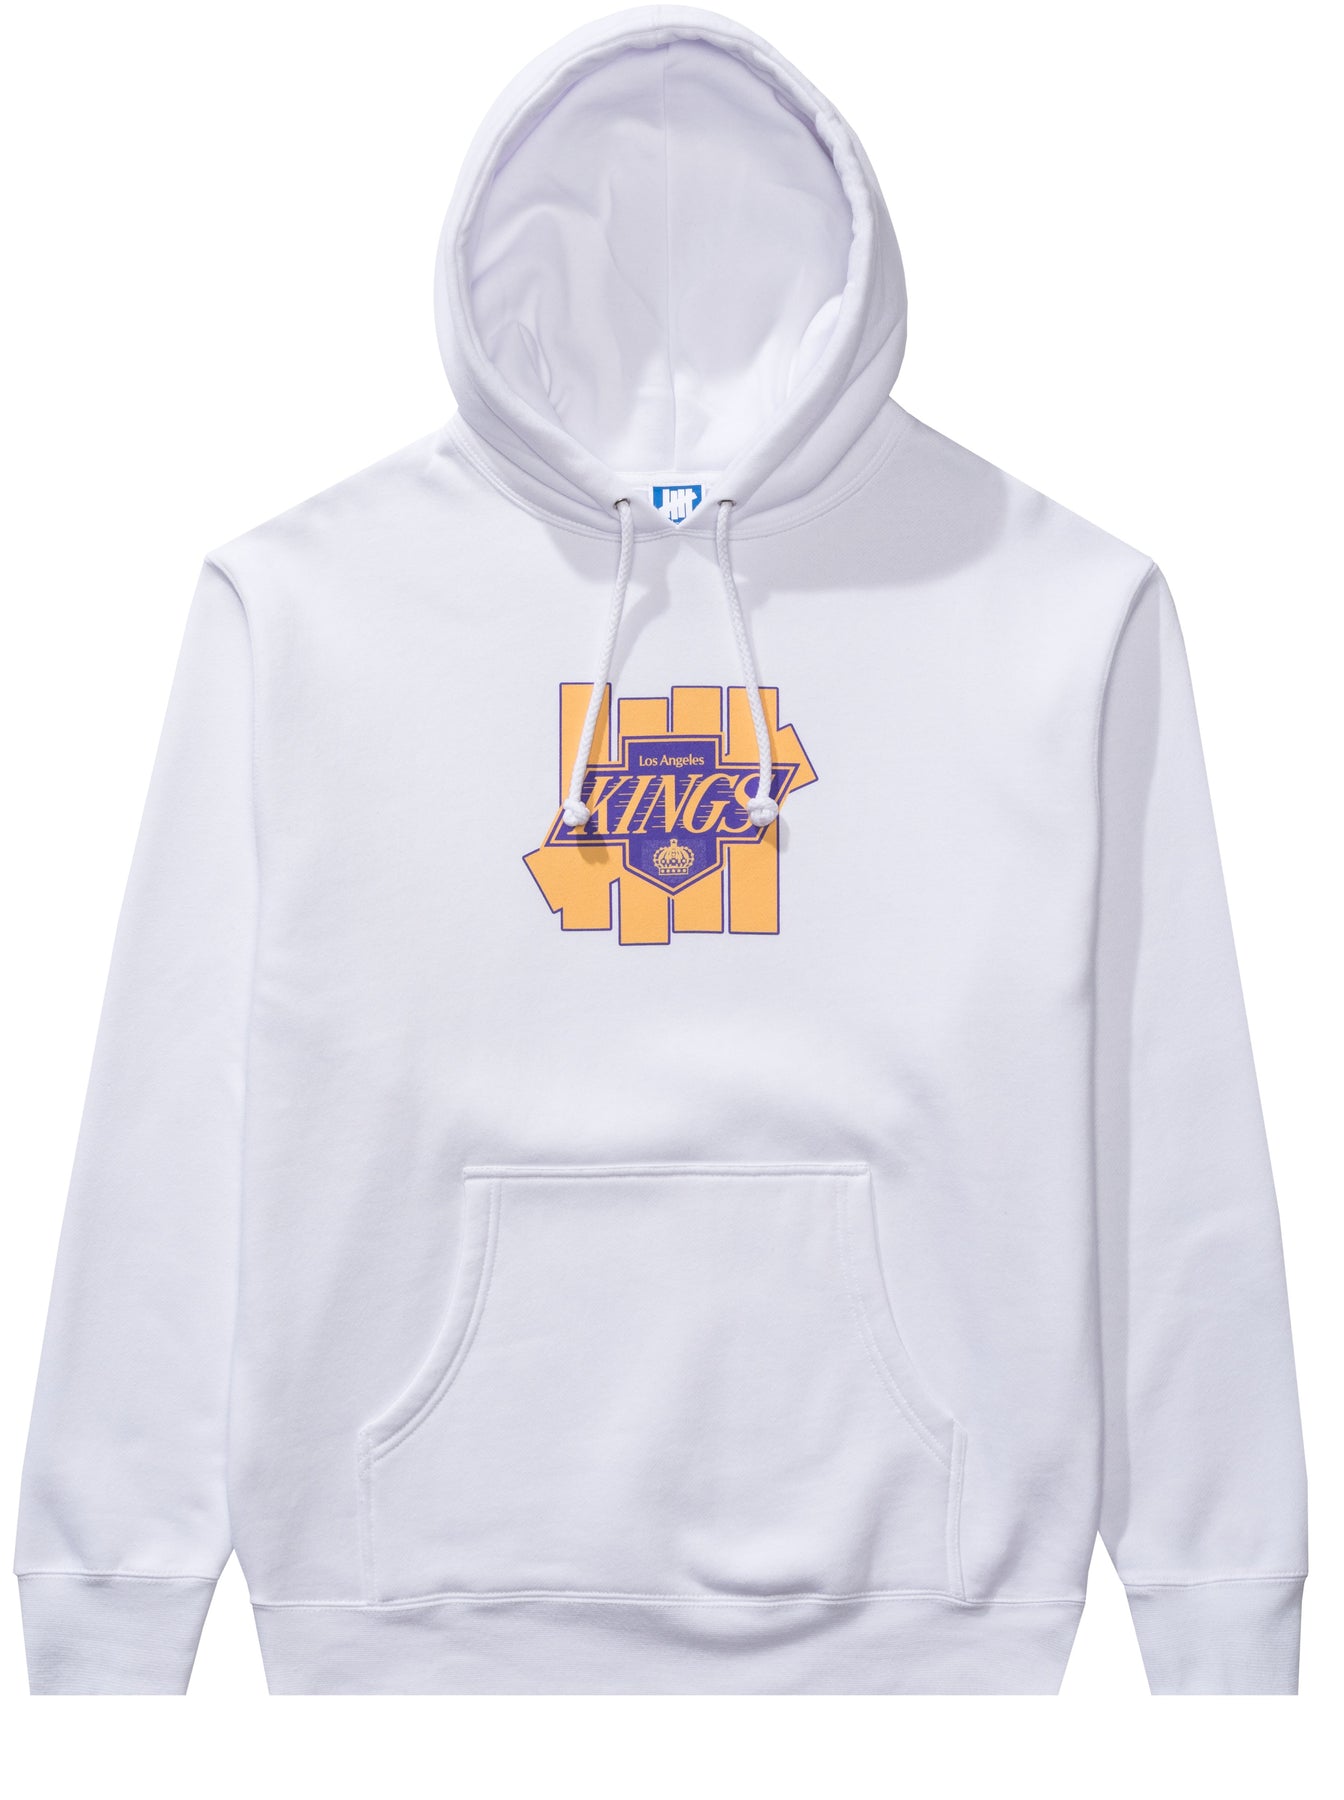 Undefeated, Jackets & Coats, La Kings X Undefeated Hoodie